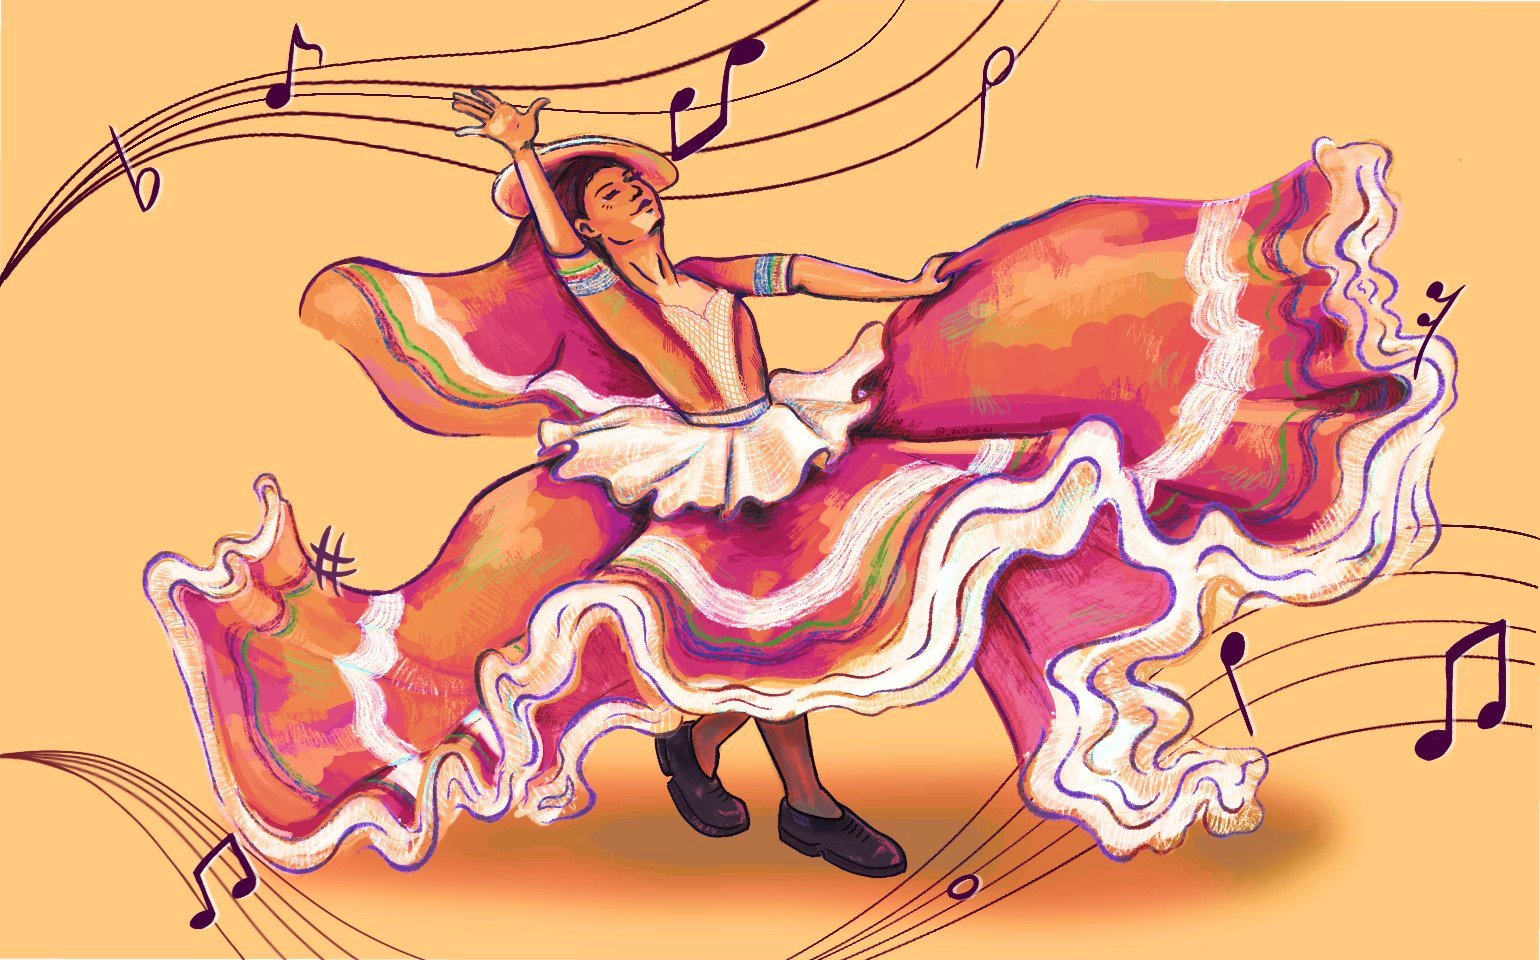 A woman in a large flowing dress dances with musical notes above her head.